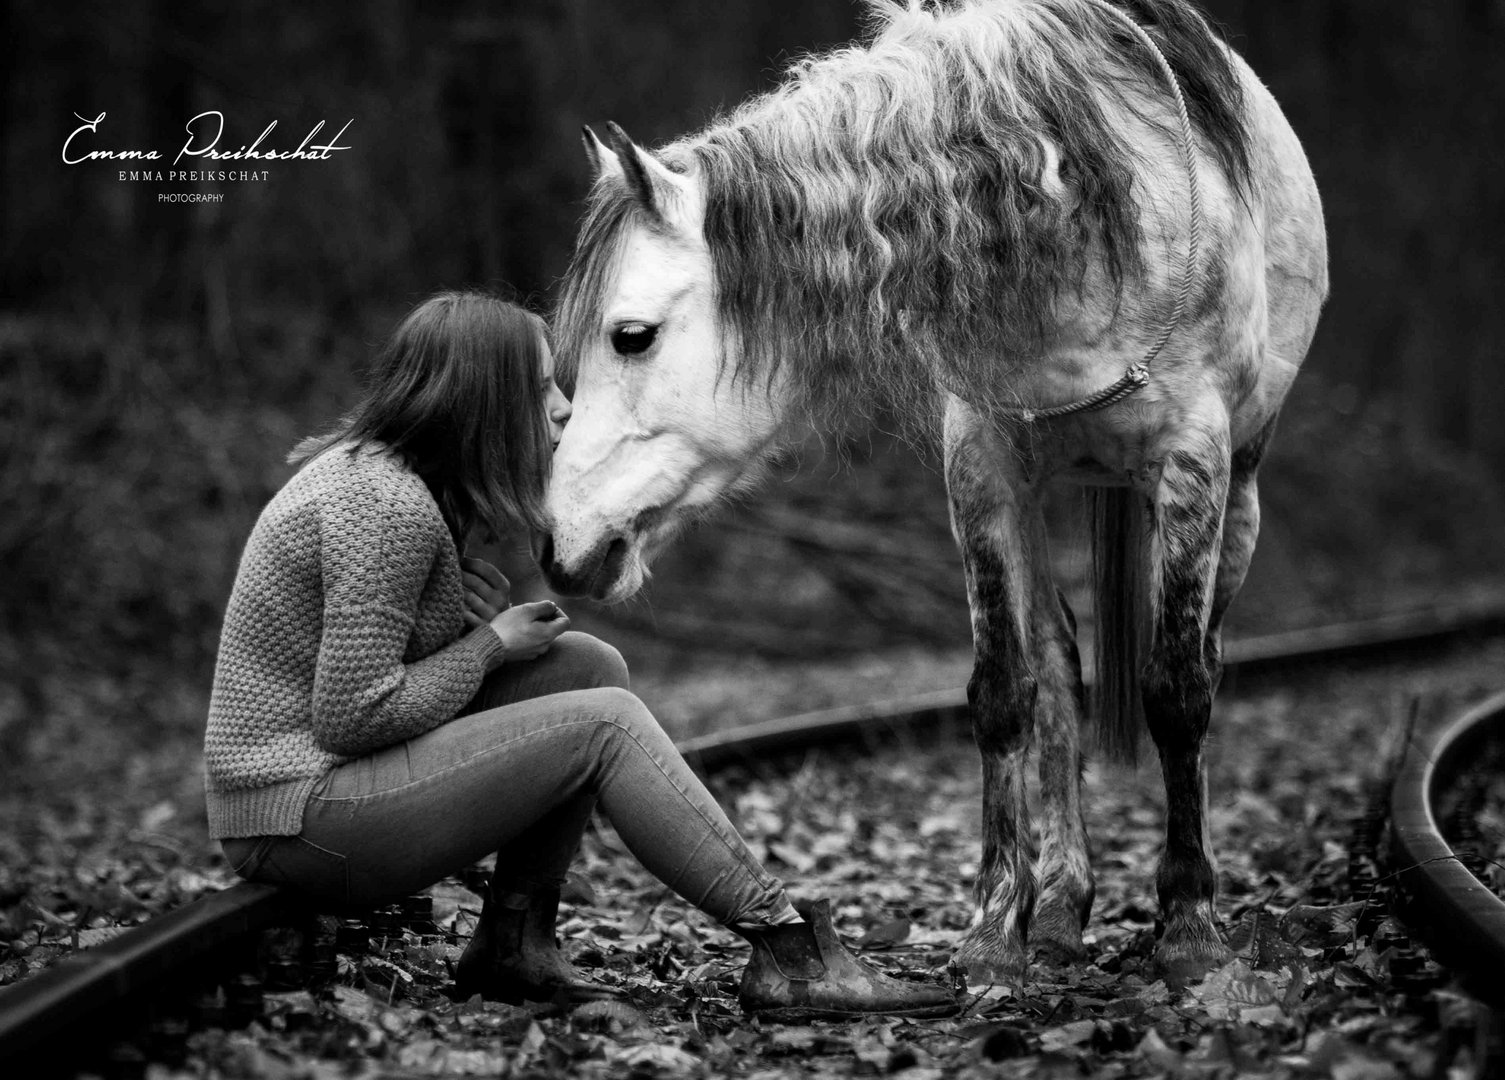 "every girl has that one special horse that one horse who changes everything about them"